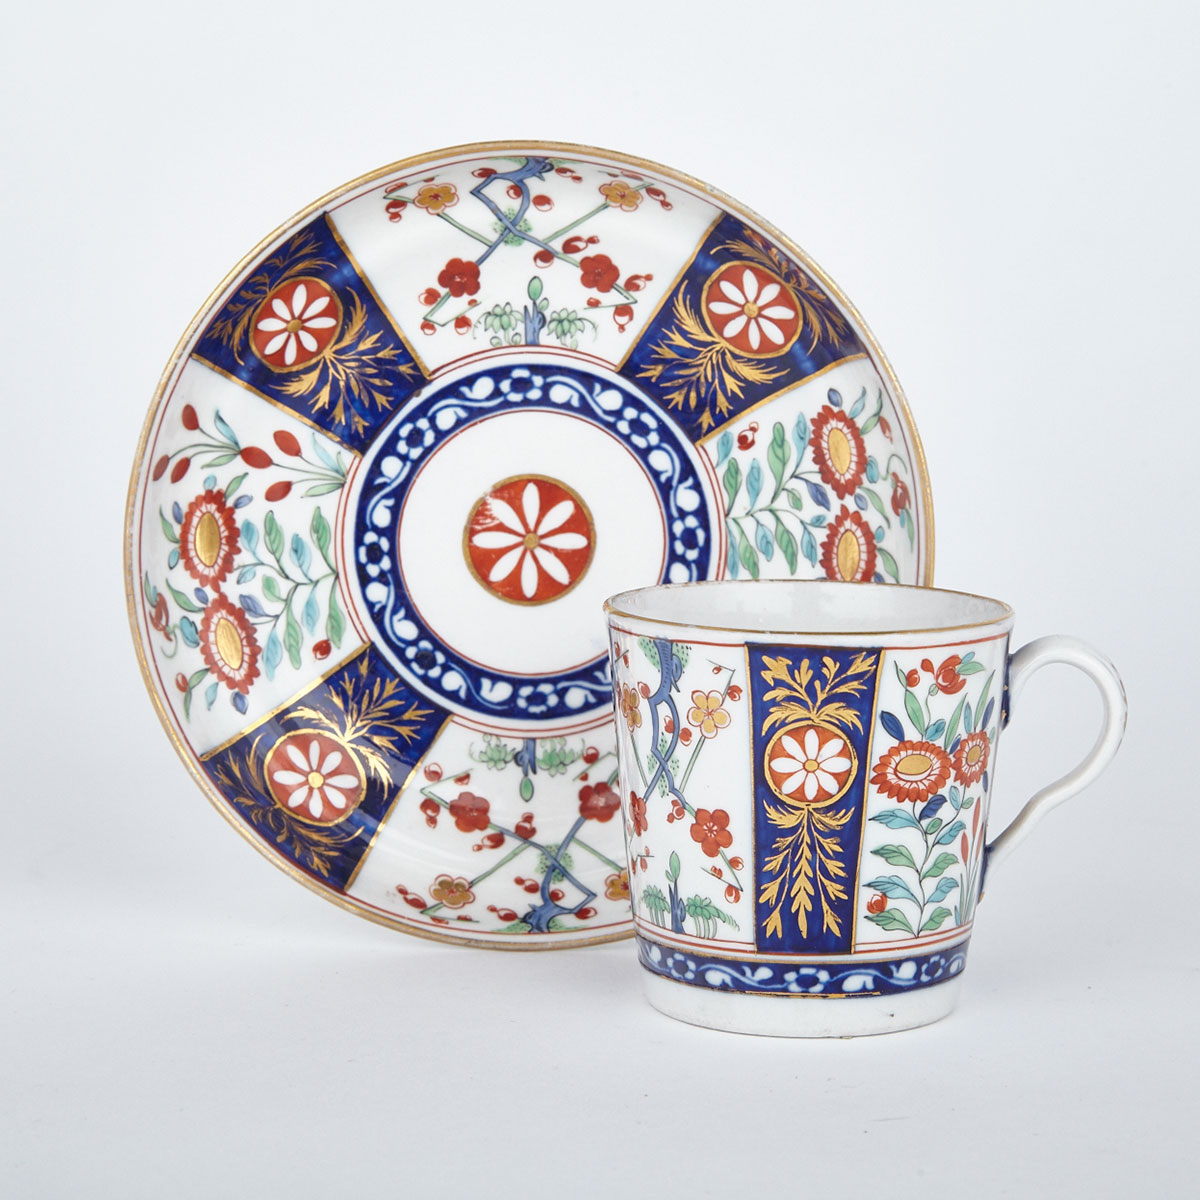 Worcester ‘Rich Queen’s’ Pattern Coffee Cup and Saucer, c.1770